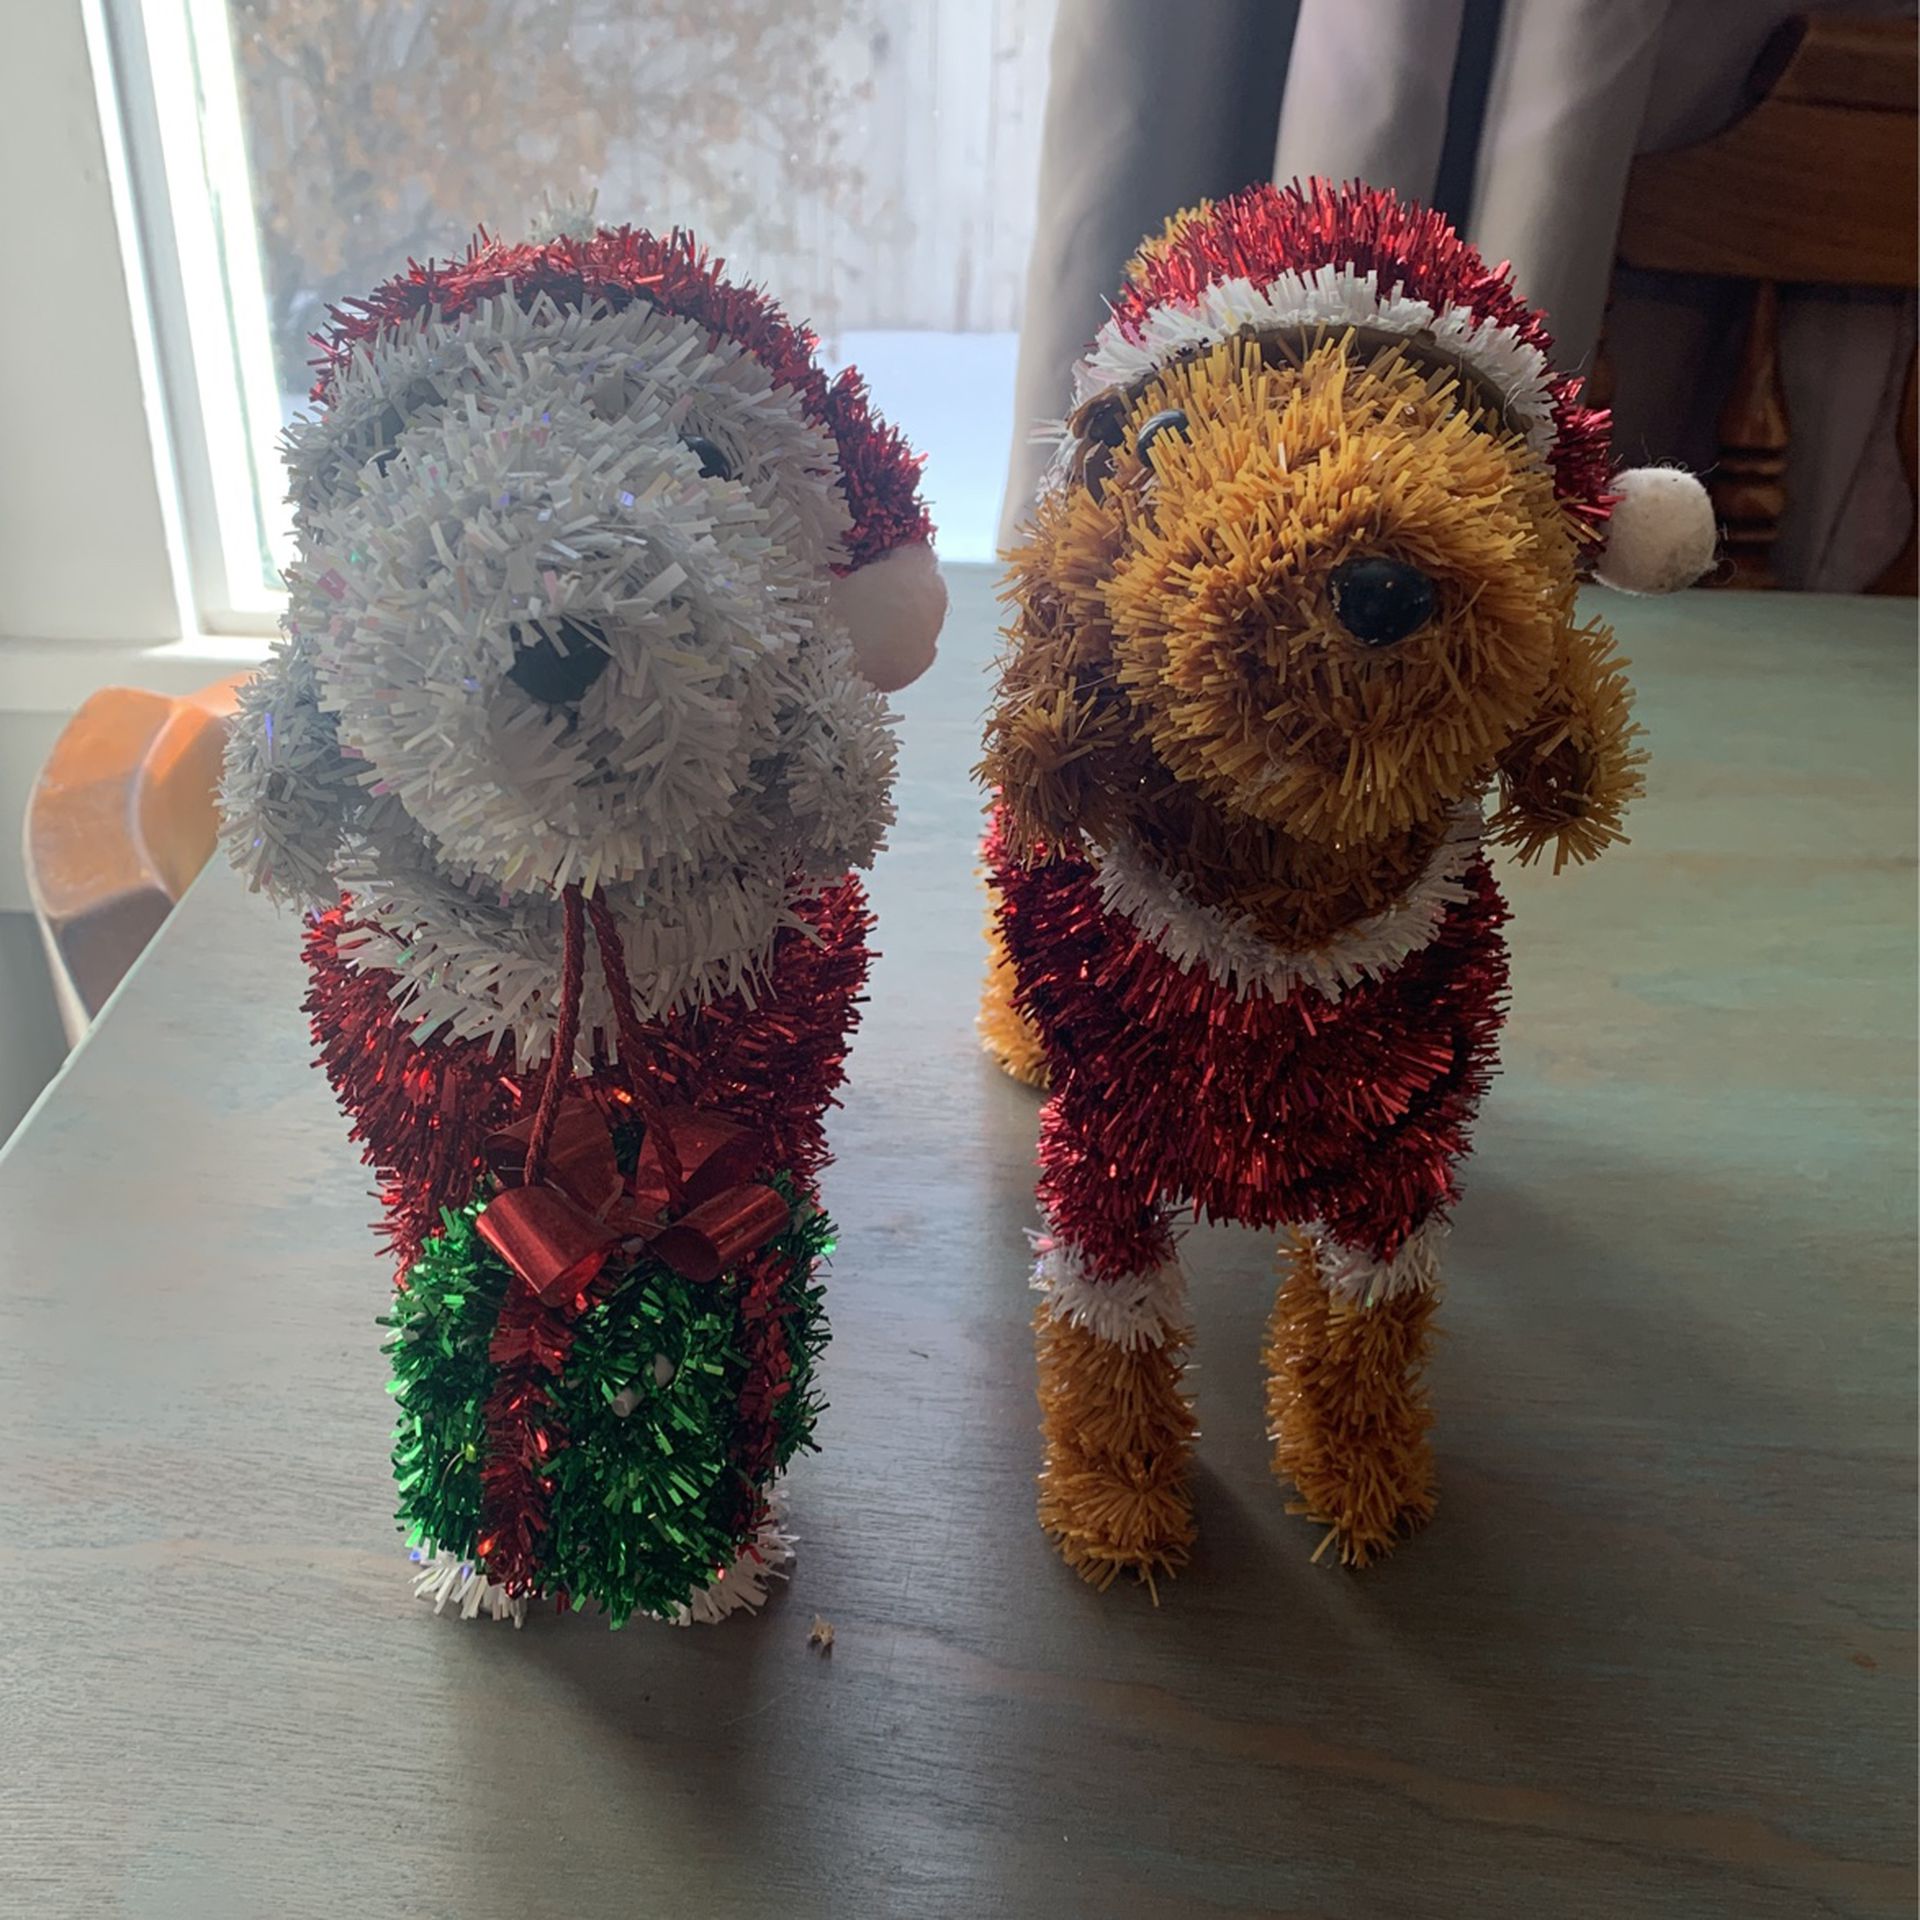 (2) 1’ Tall Puppy Christmas Decorations